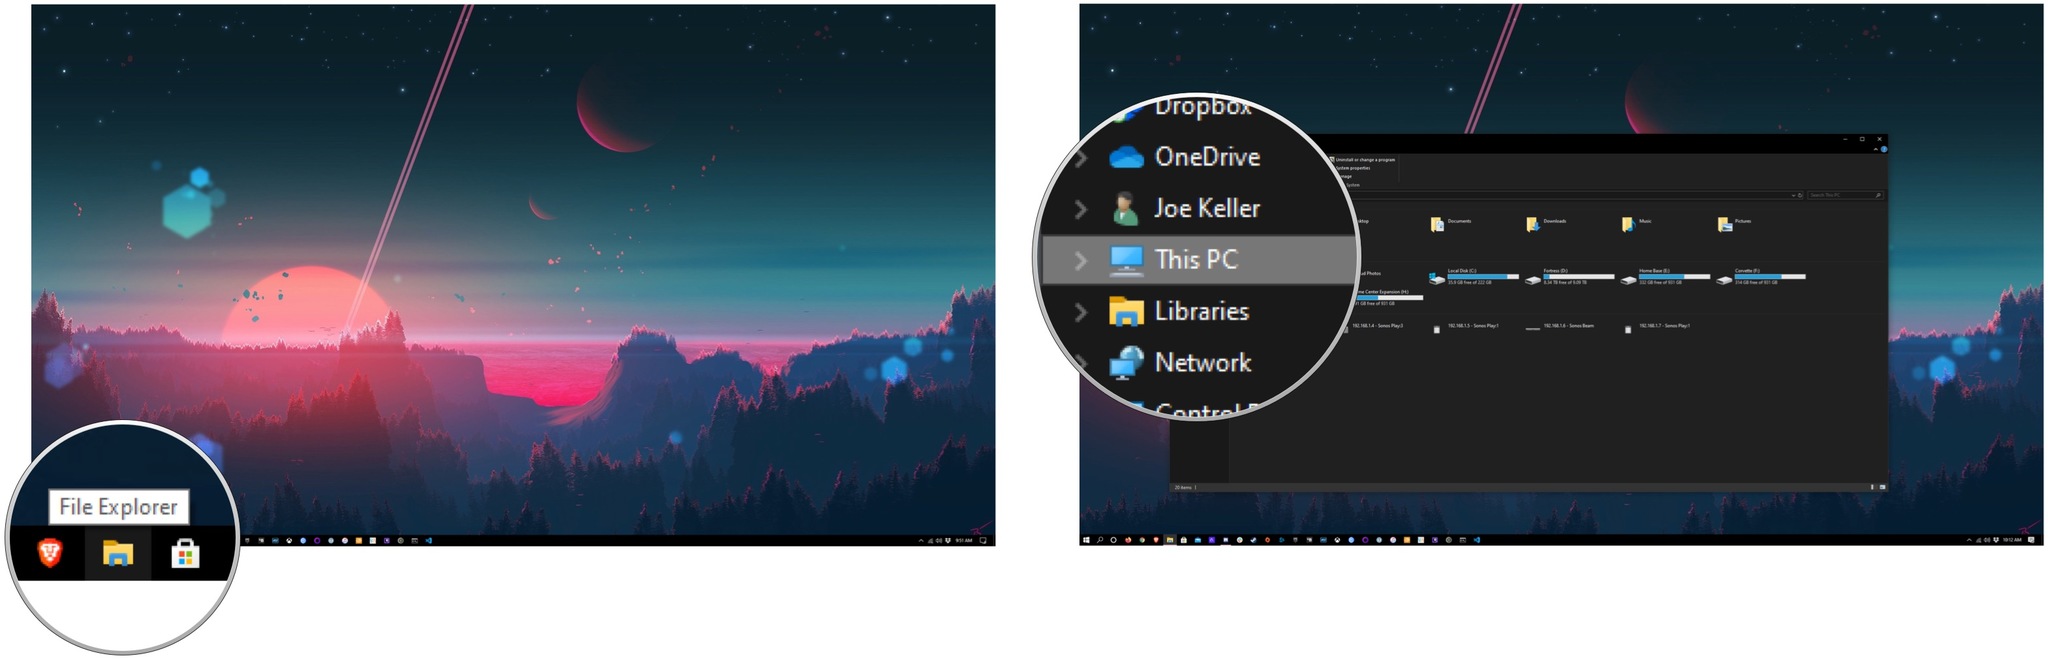 Transfer photos with File Explorer, showing how to open File Explorer, then click This PC